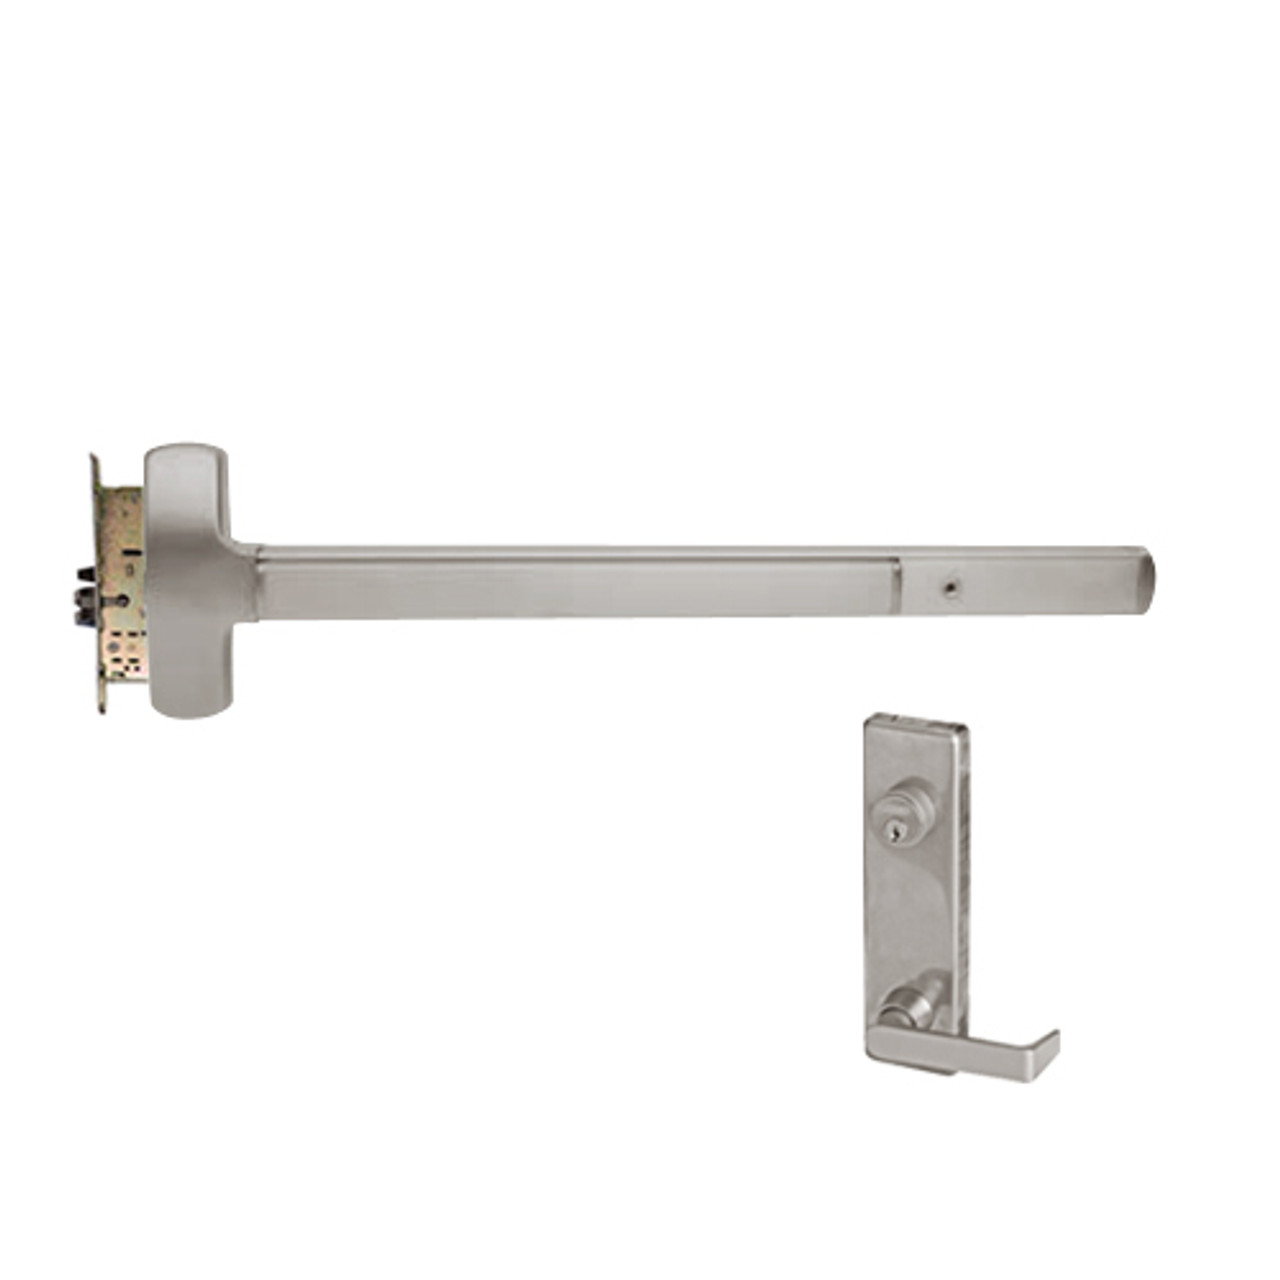 25-M-L-DANE-US32D-4-RHR Falcon Exit Device in Satin Stainless Steel